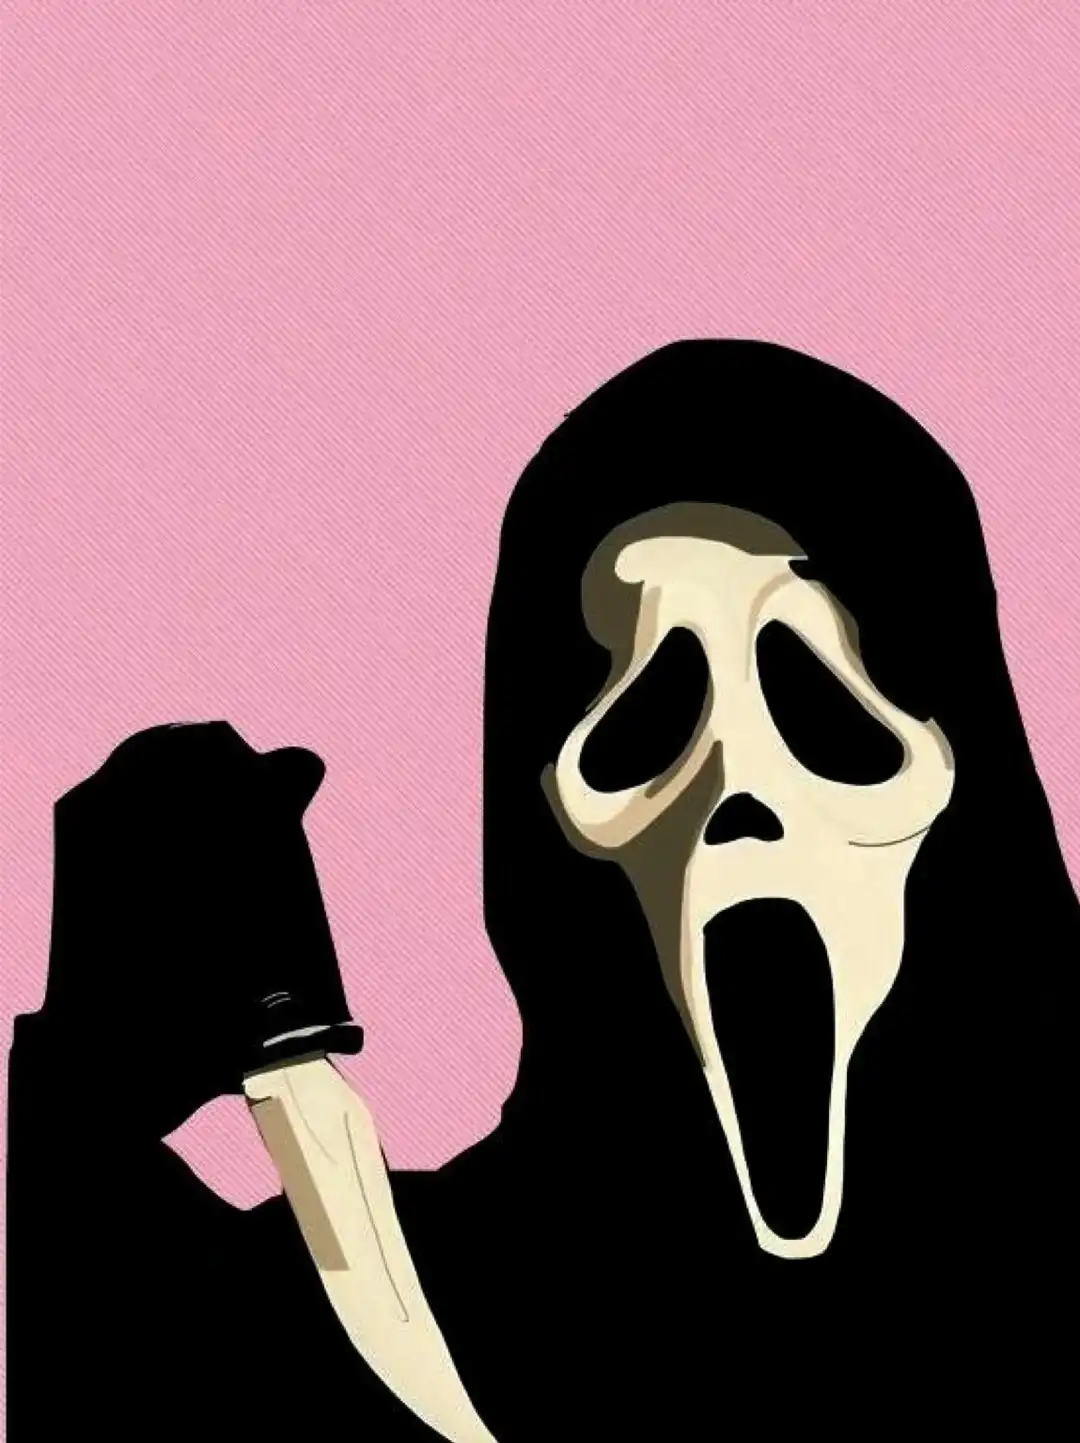 A scream mask holding a knife in front of a pink background - Ghostface